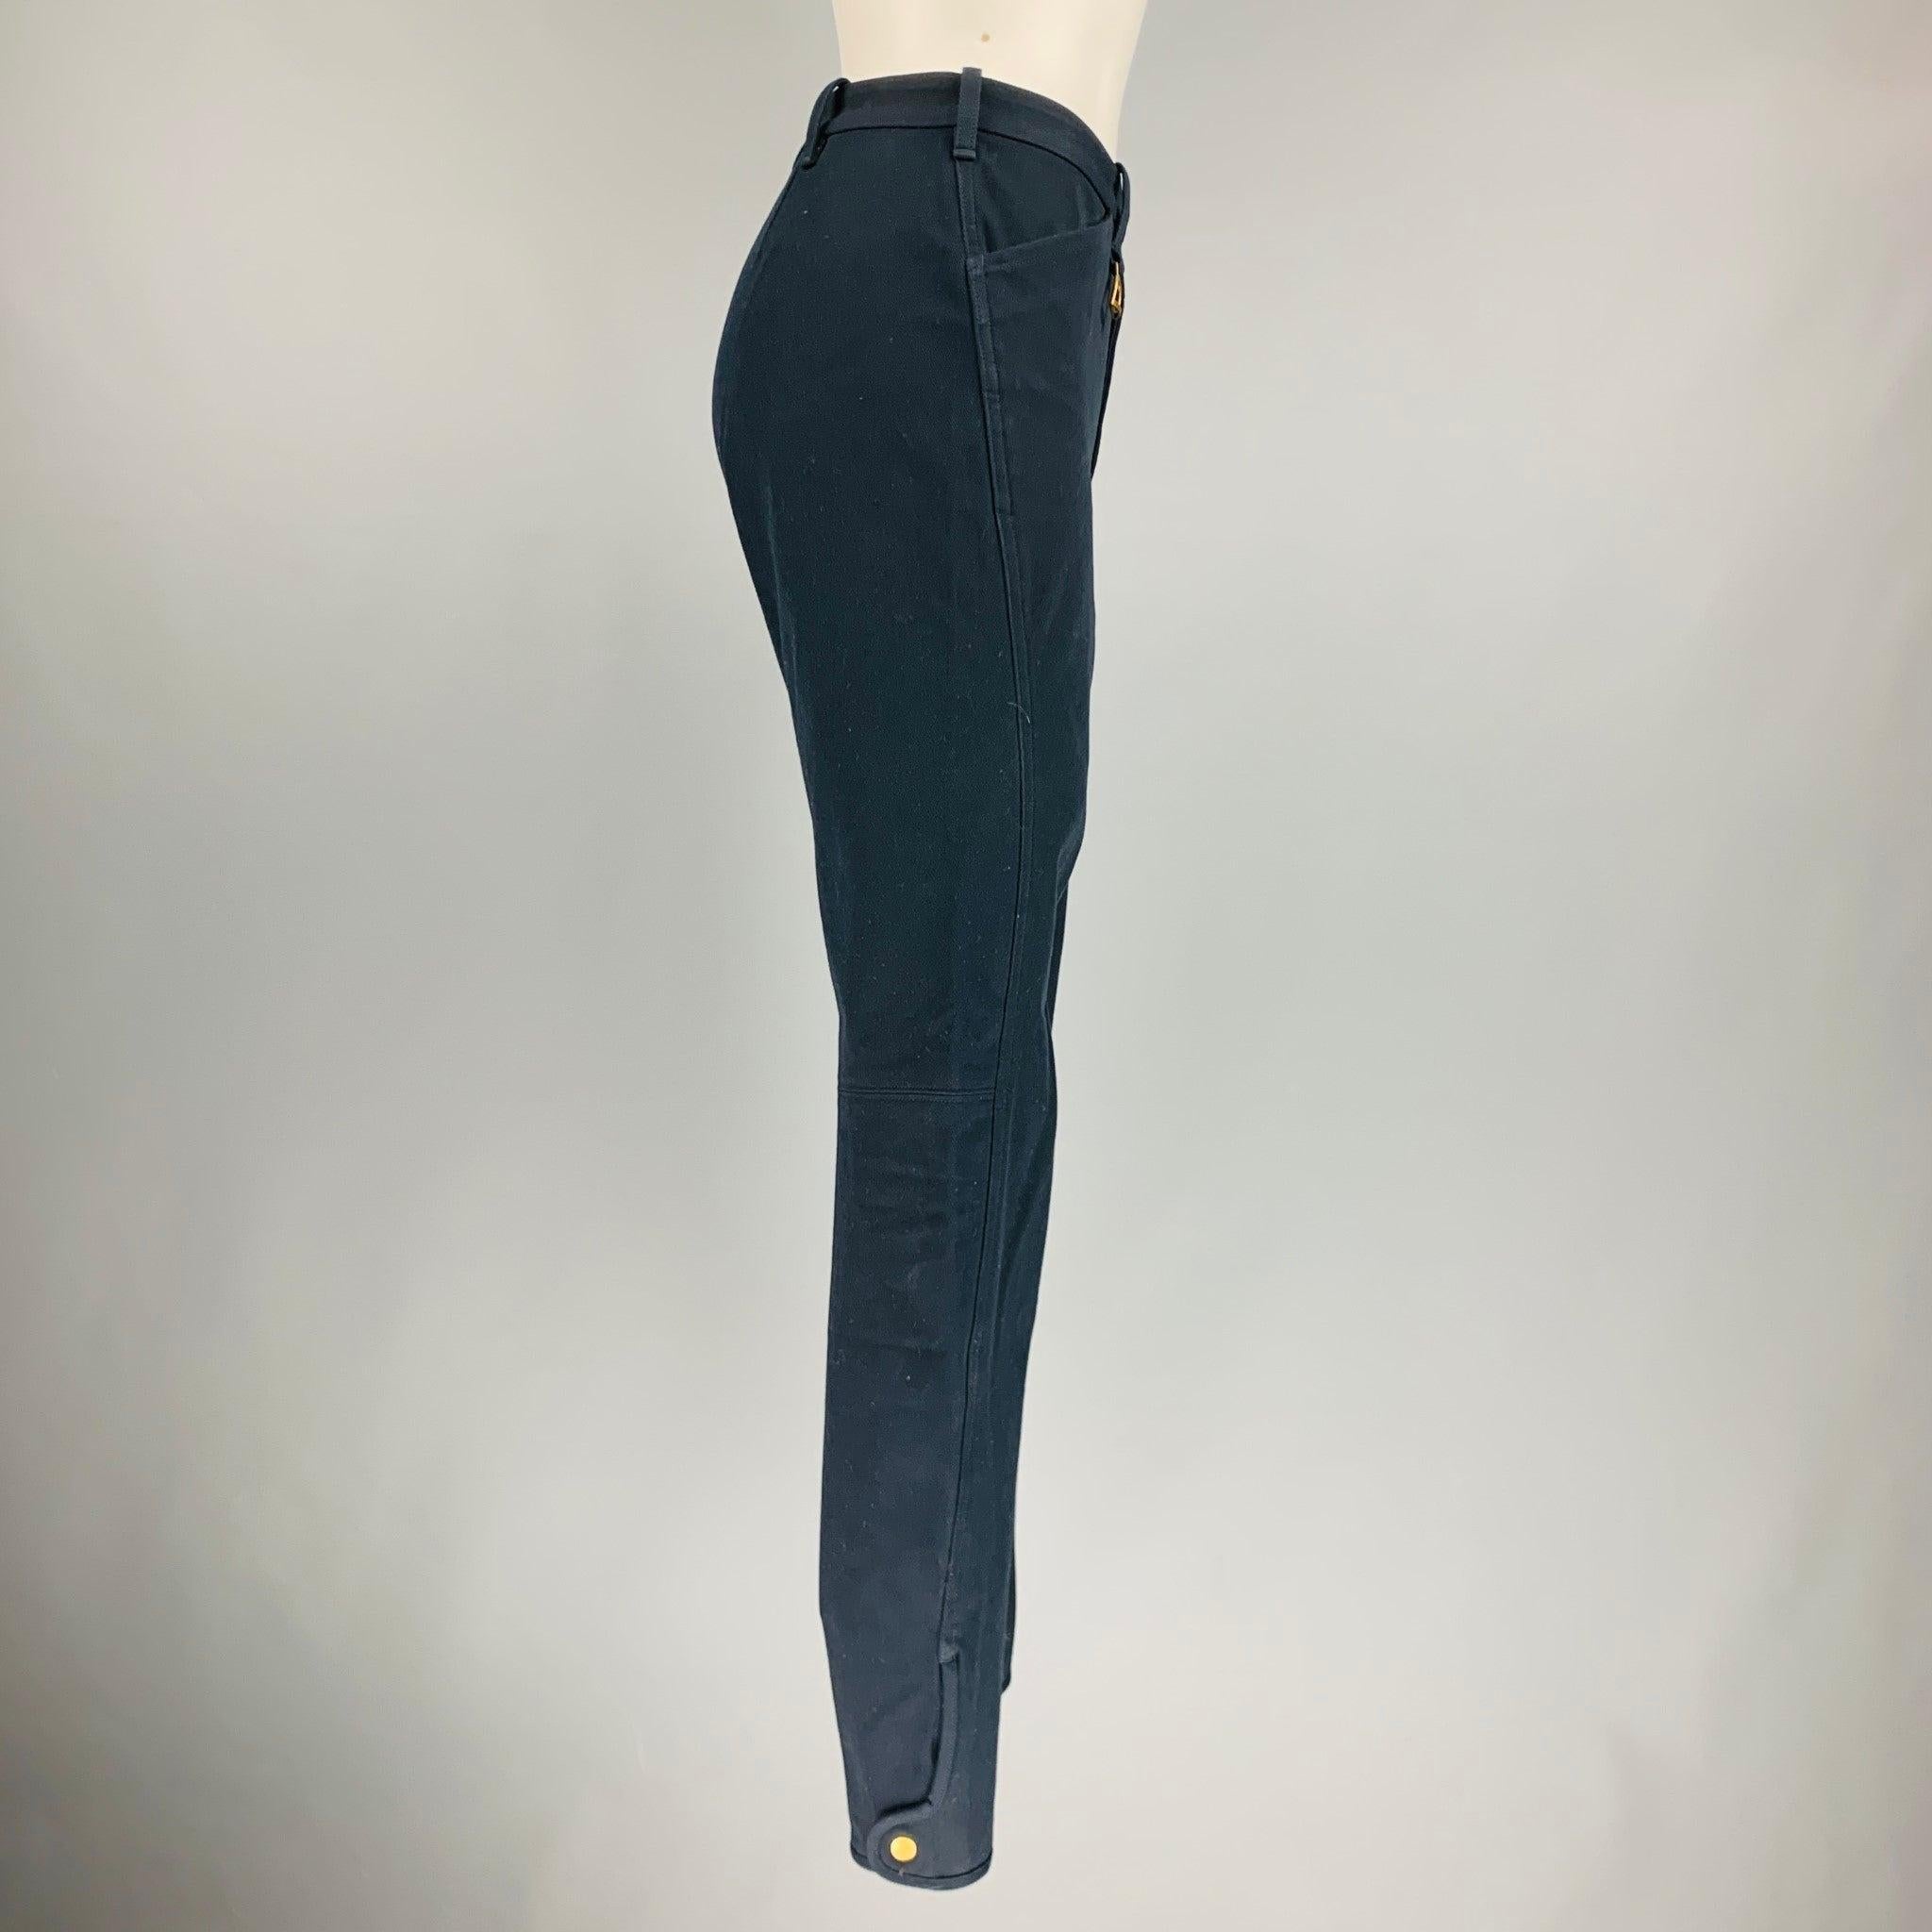 RALPH LAUREN Size 8 Navy Cotton Elastane Patchwork Suede Casual Pants In Excellent Condition For Sale In San Francisco, CA